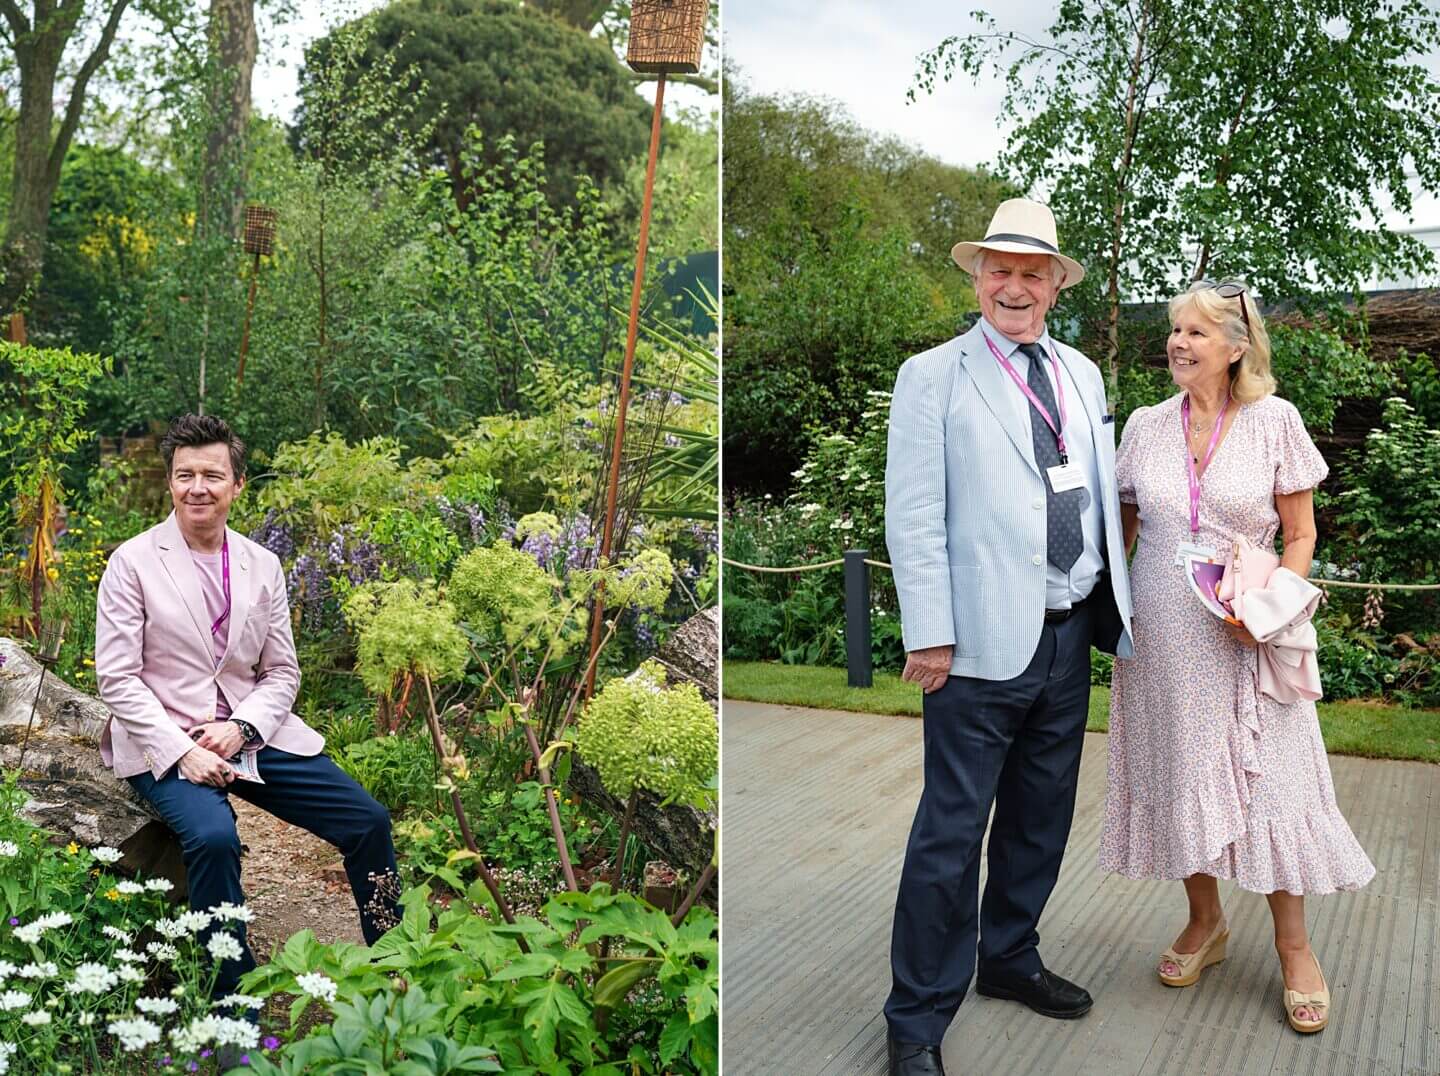 Rick Astley, and Johnny Ball with his wife, visiting Chelsea Flower Show